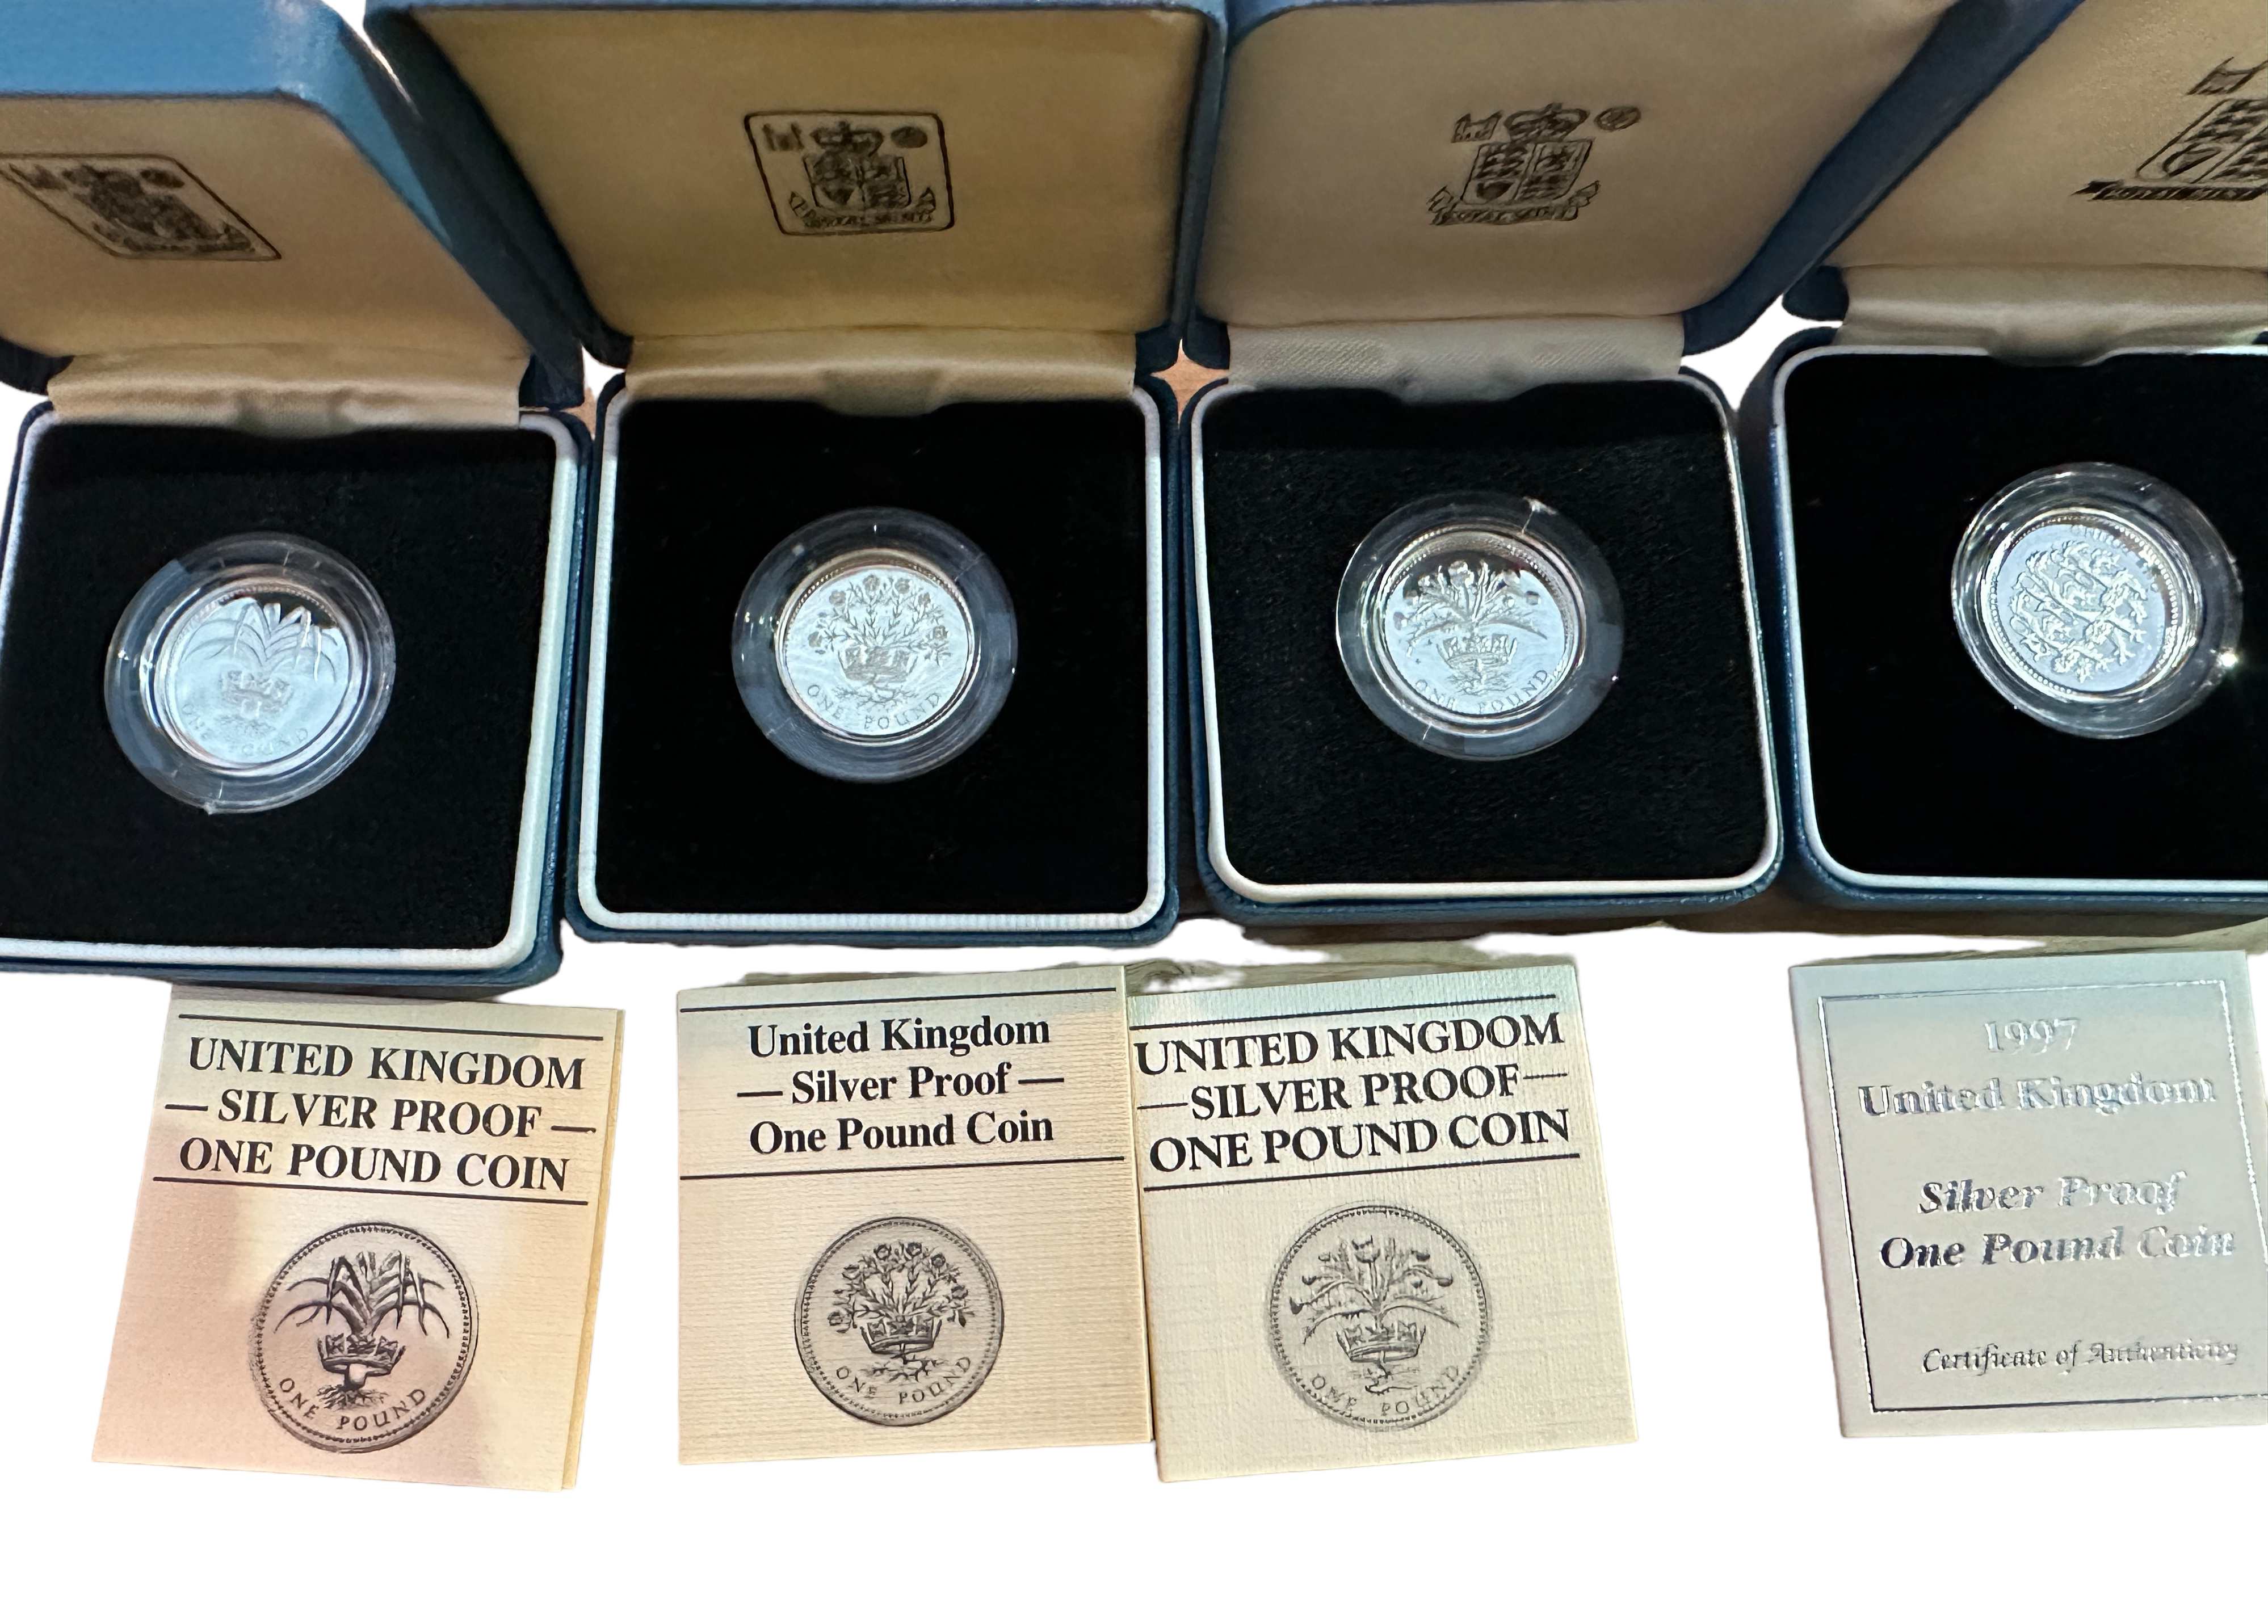 Lot of 3 Boxed Silver Proof £1 Coins and Boxed 1997 Silver Proof Coin - Image 2 of 3